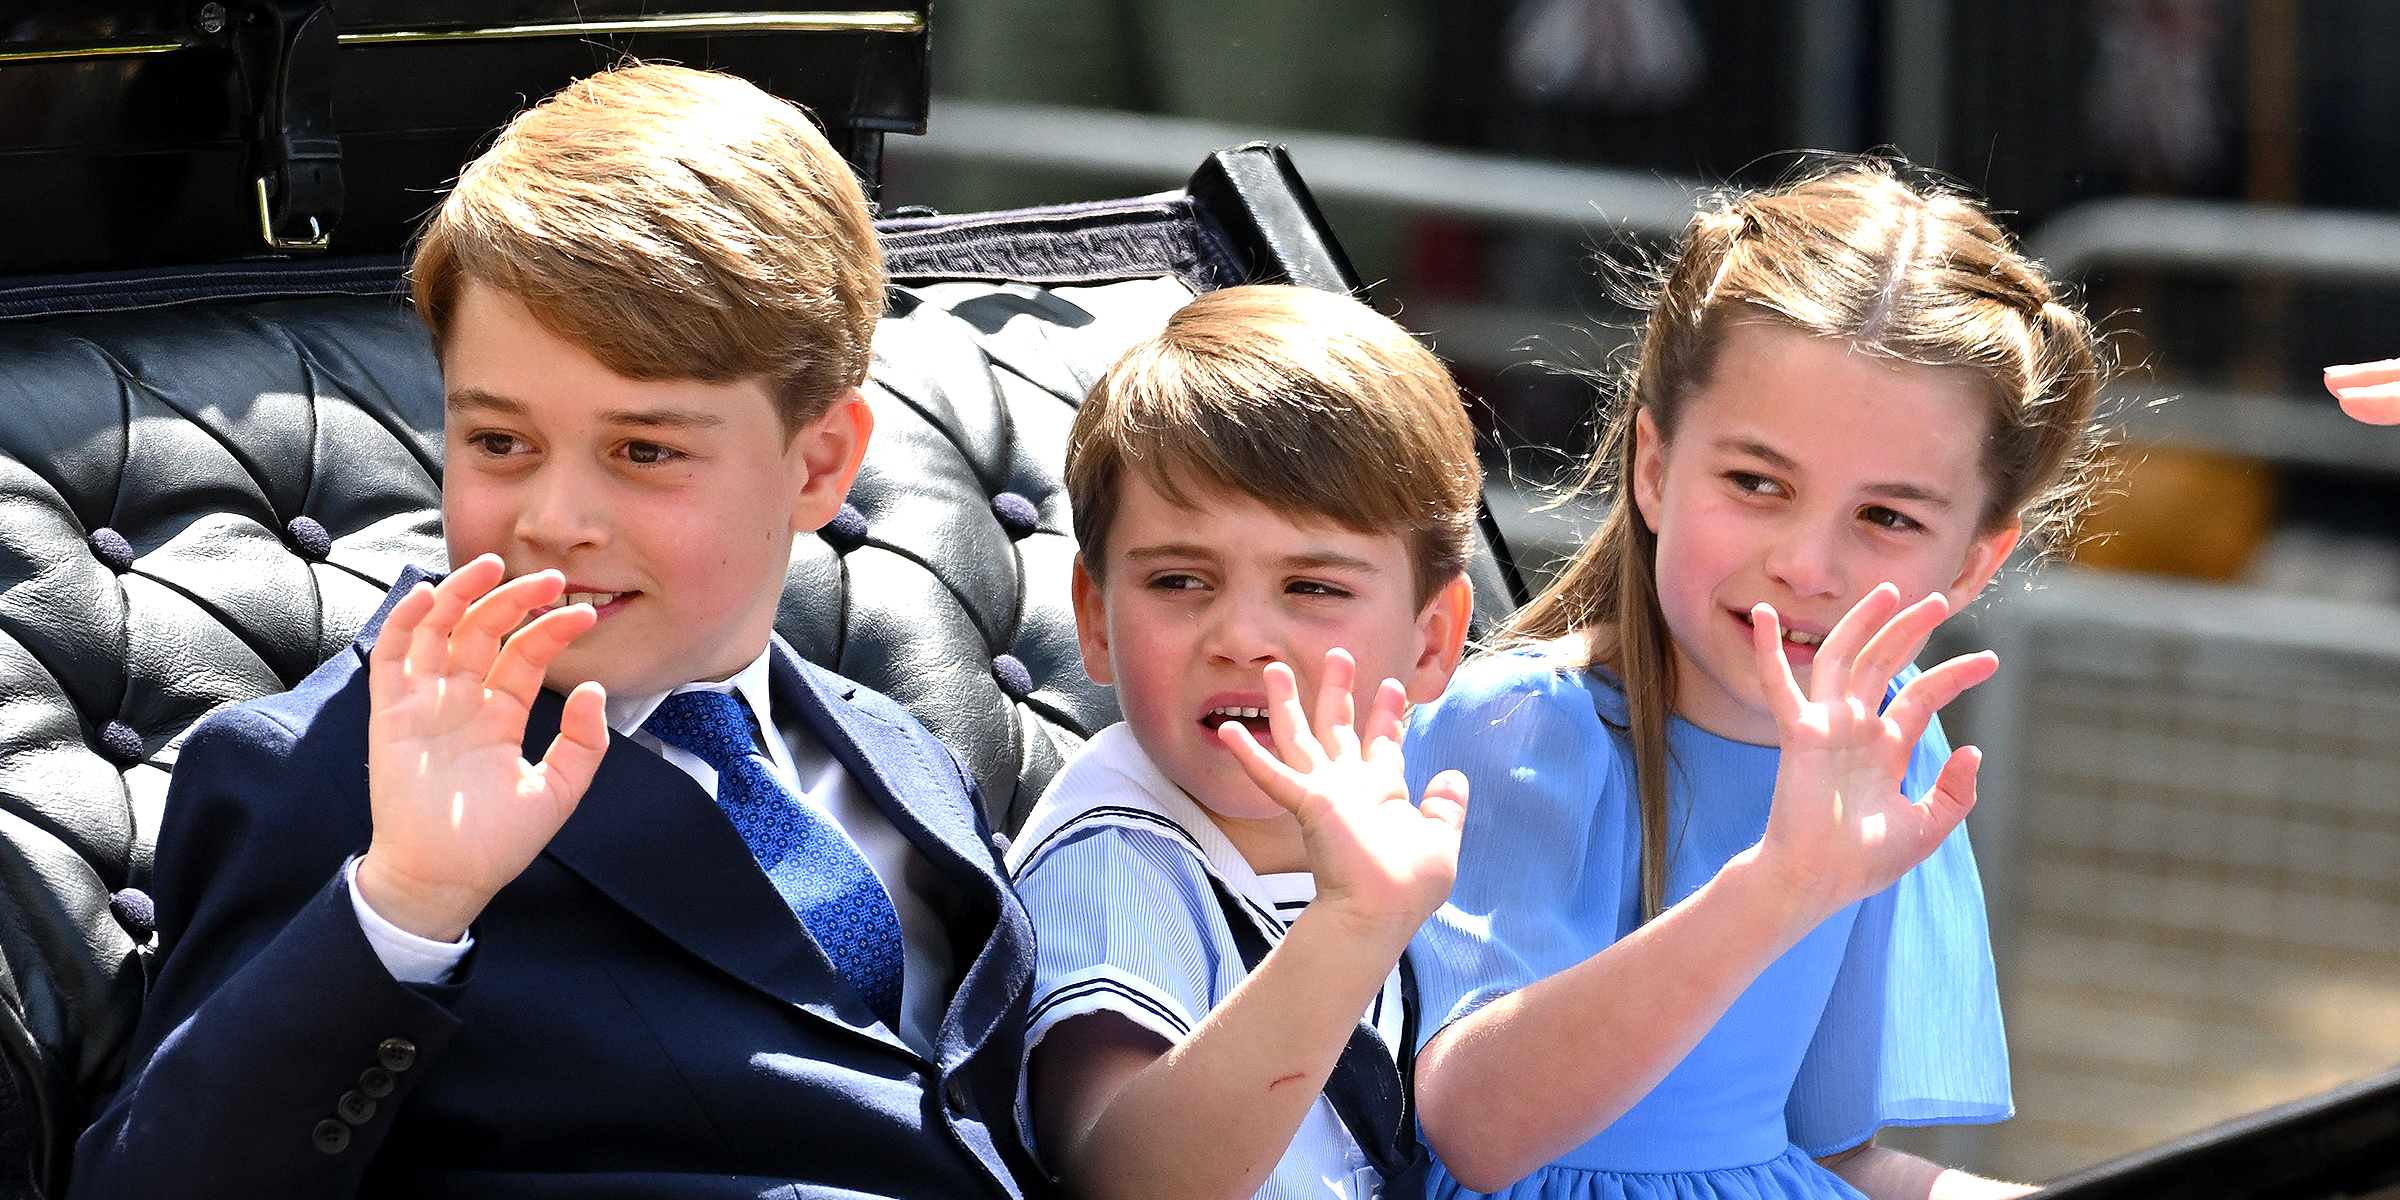 Prince George, Prince Louis and Princess Charlotte | Source: Getty Images